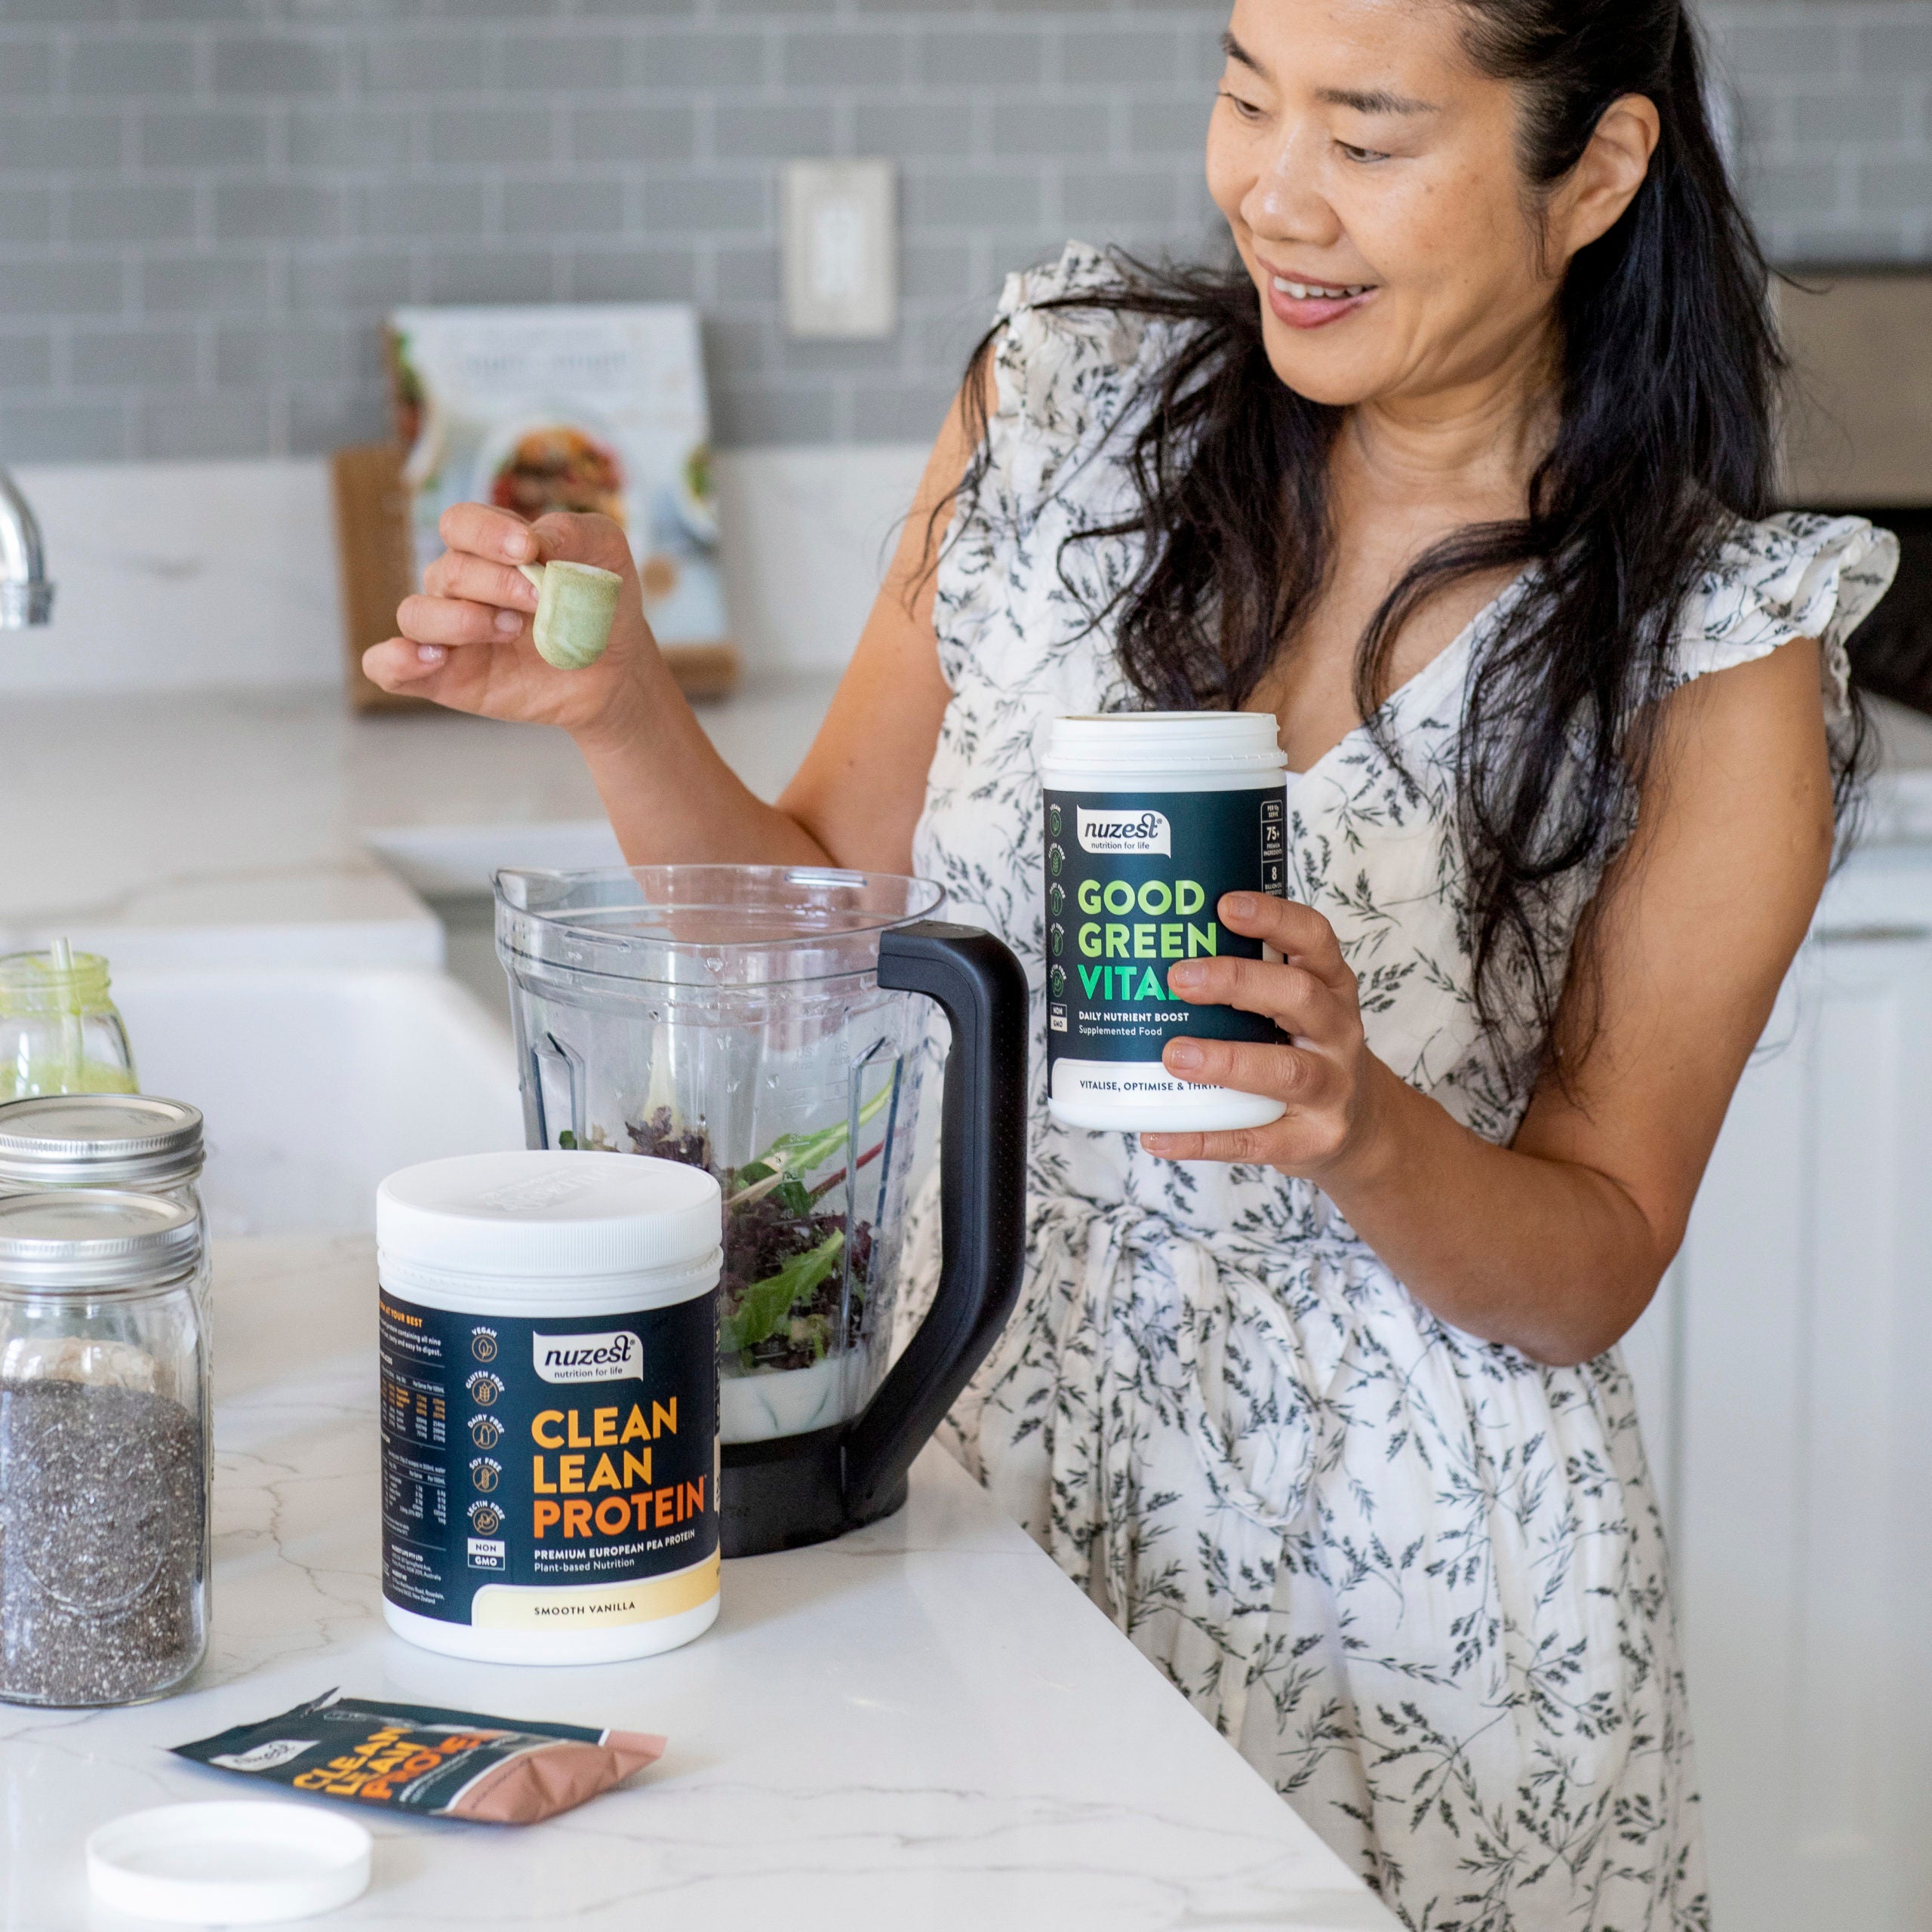 Nuzest’s Green Smoothie With Protein Powder: Your Vitamin And Protein Boost In One!